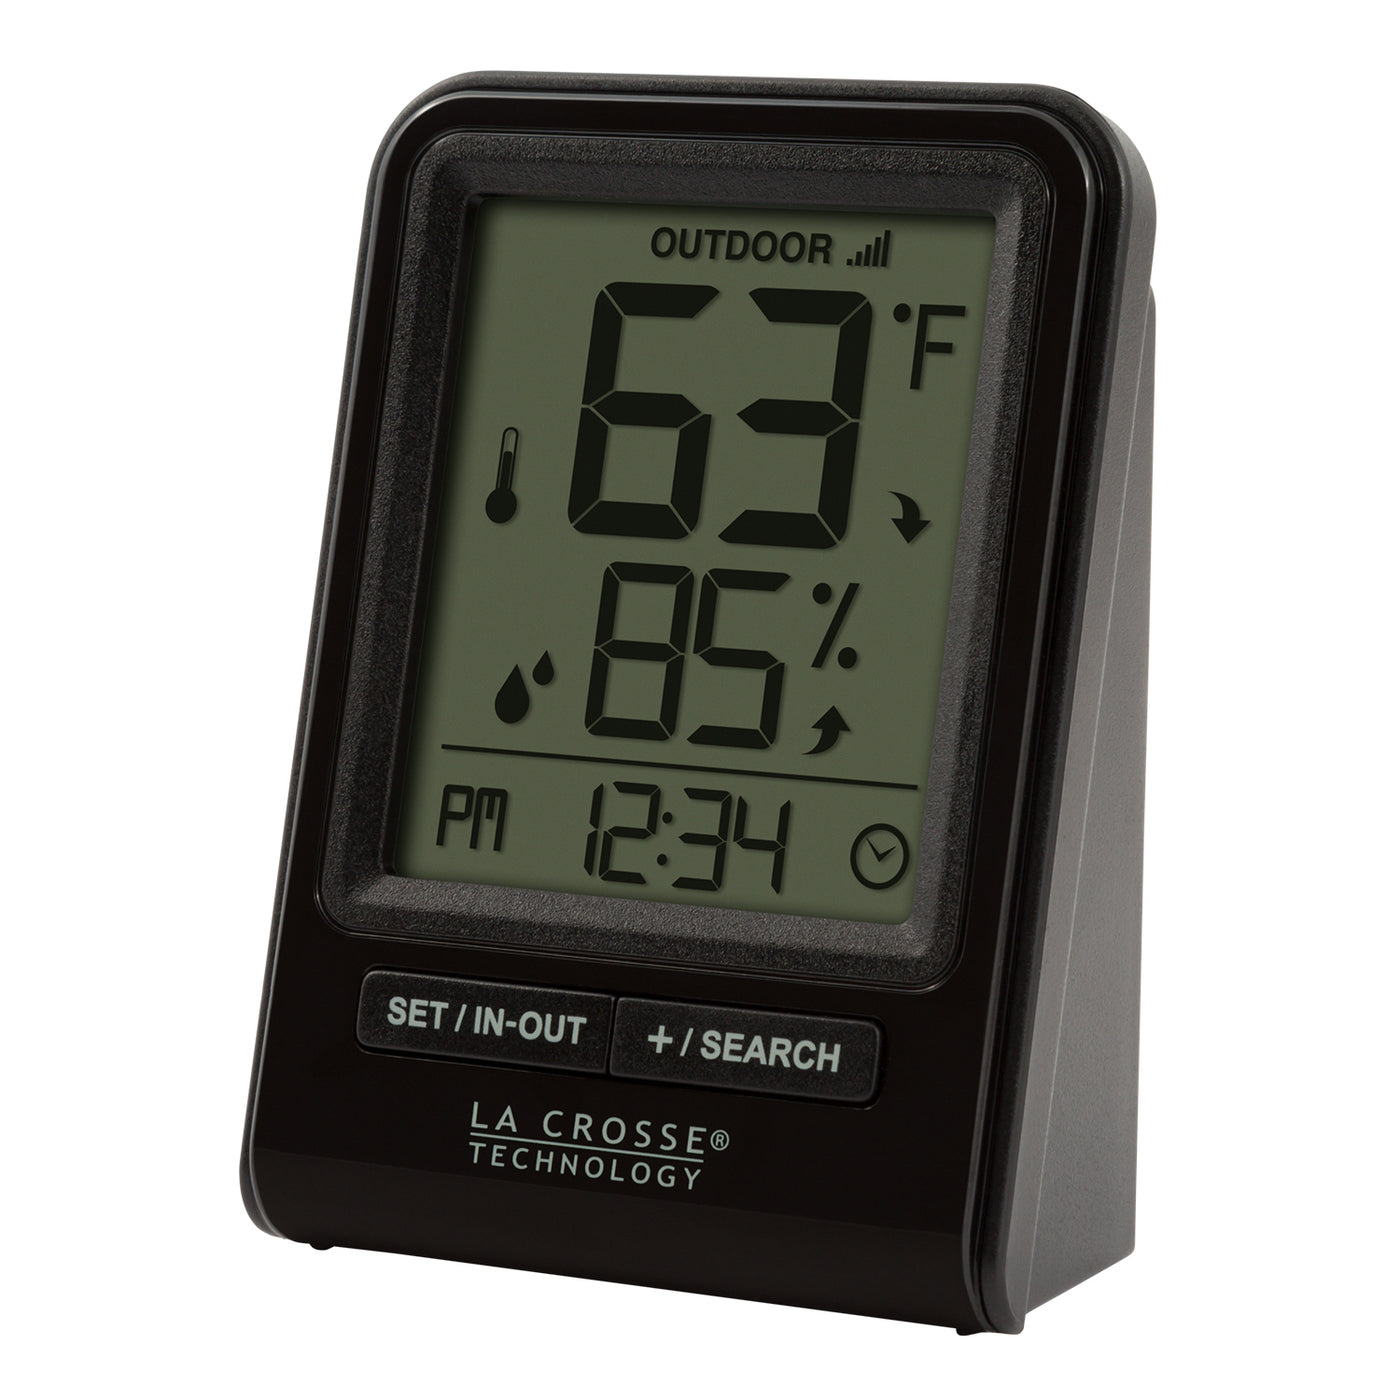 La Crosse Technology 308-179OR La Crosse Technology Indoor/Outdoor  Thermometers